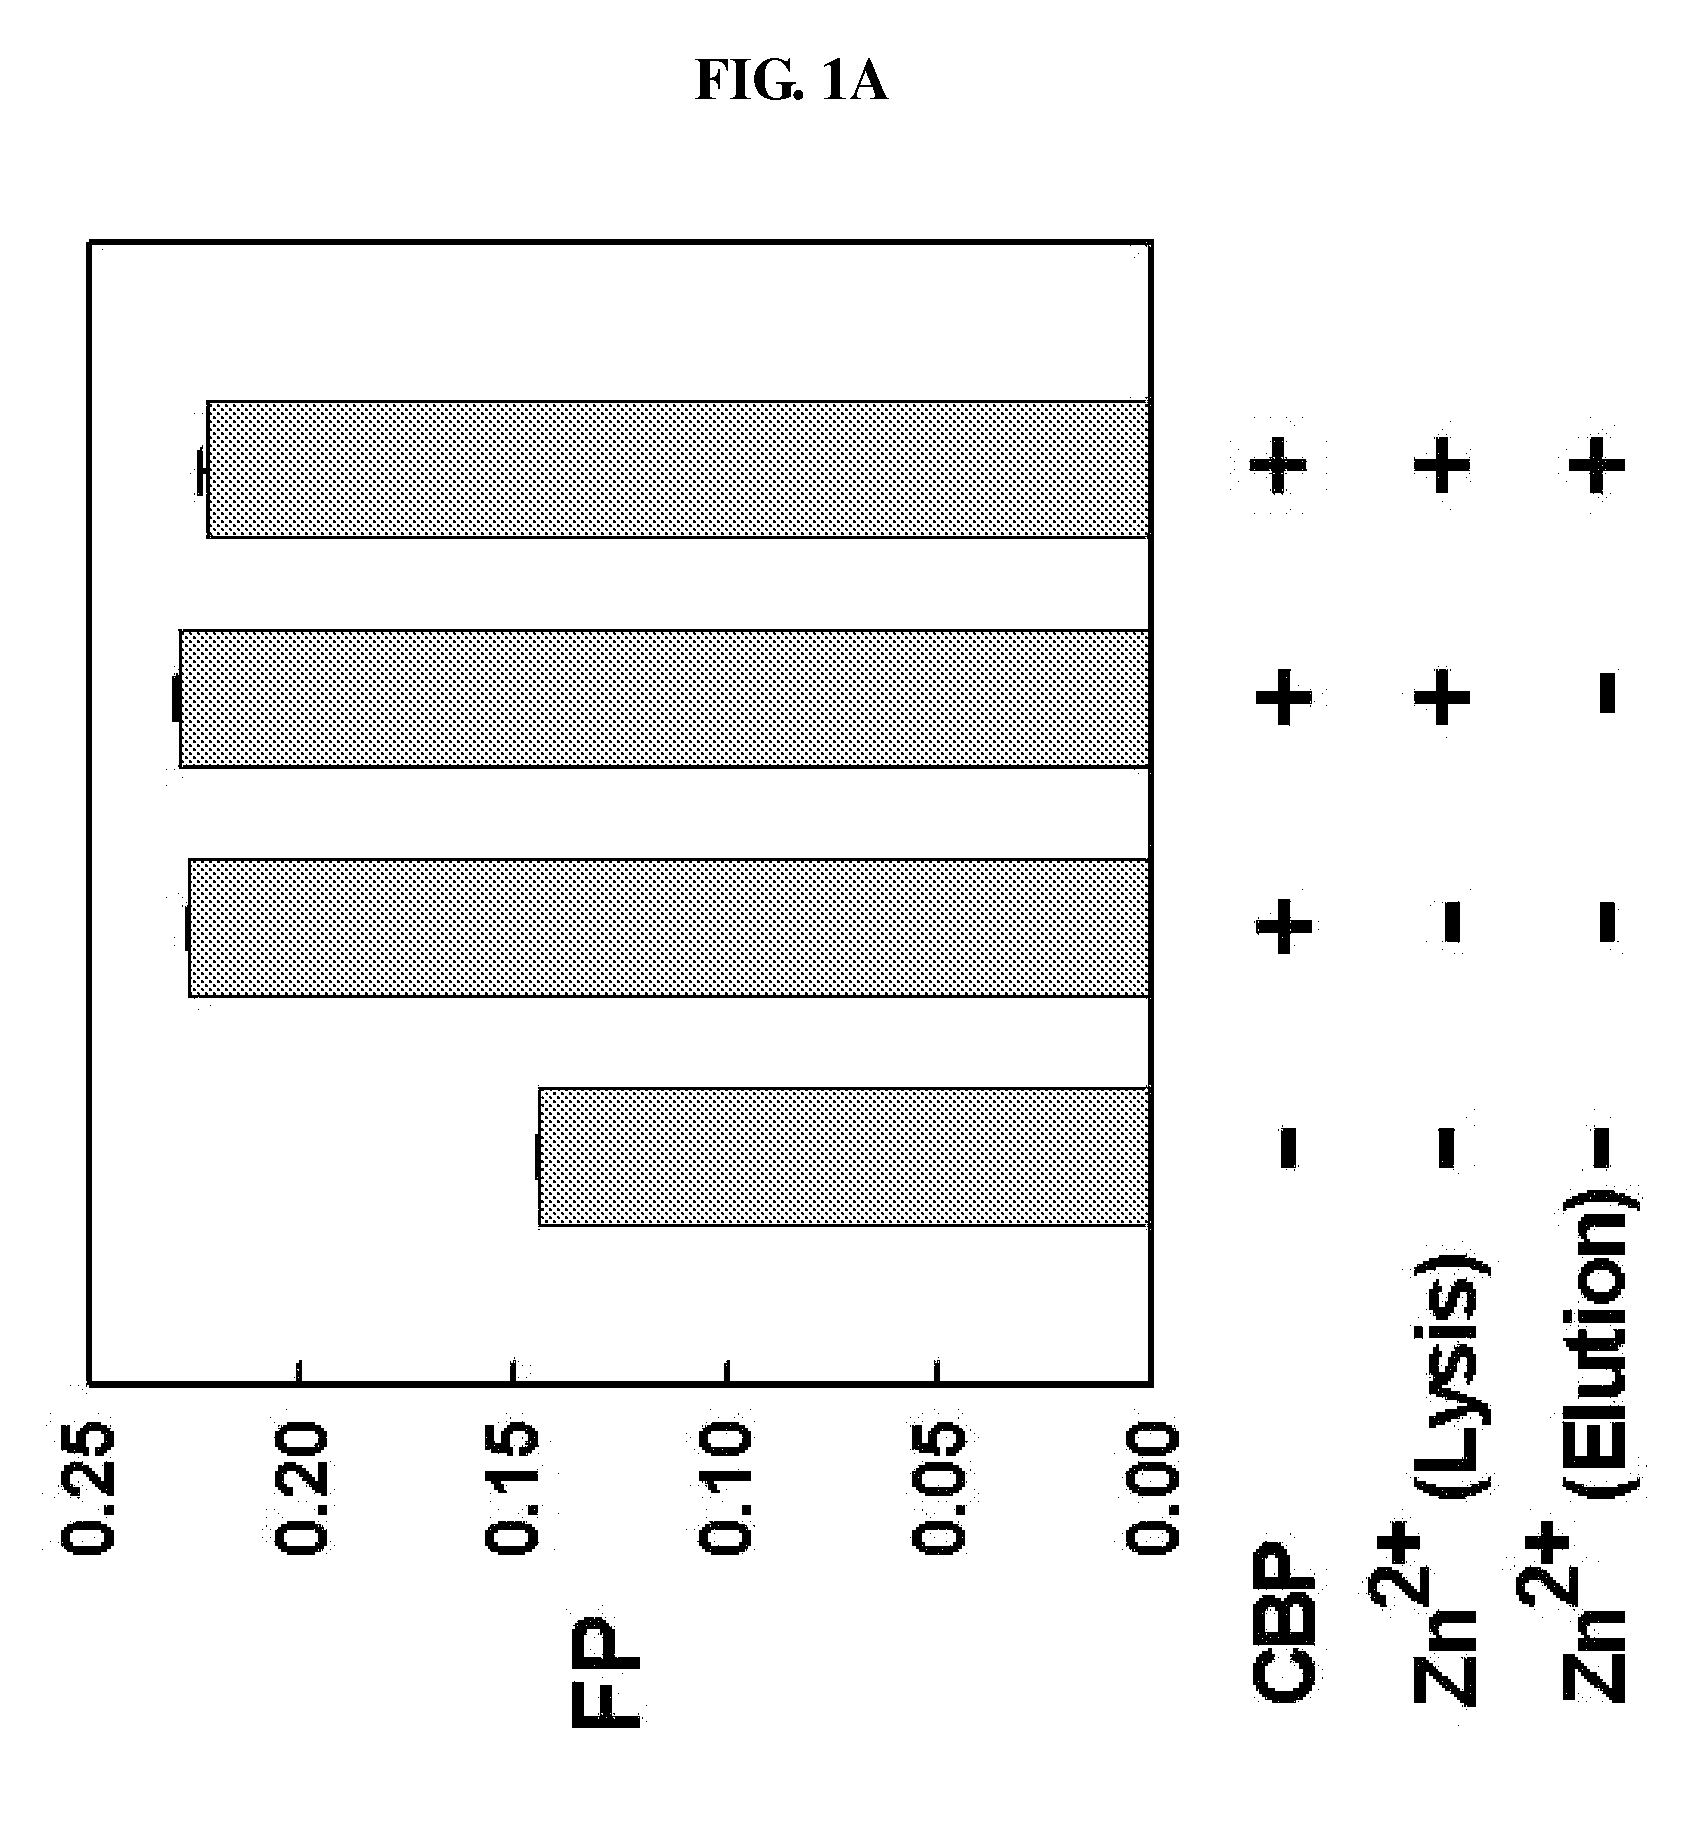 METHOD FOR QUANTITATIVE ANALYSIS OF INTERACTIONS BETWEEN HIF-1ALPHA C-TERMINAL PEPTIDES AND CBP OR p300 PROTEINS AND METHOD OF SCREENING INHIBITORS USING THE SAME